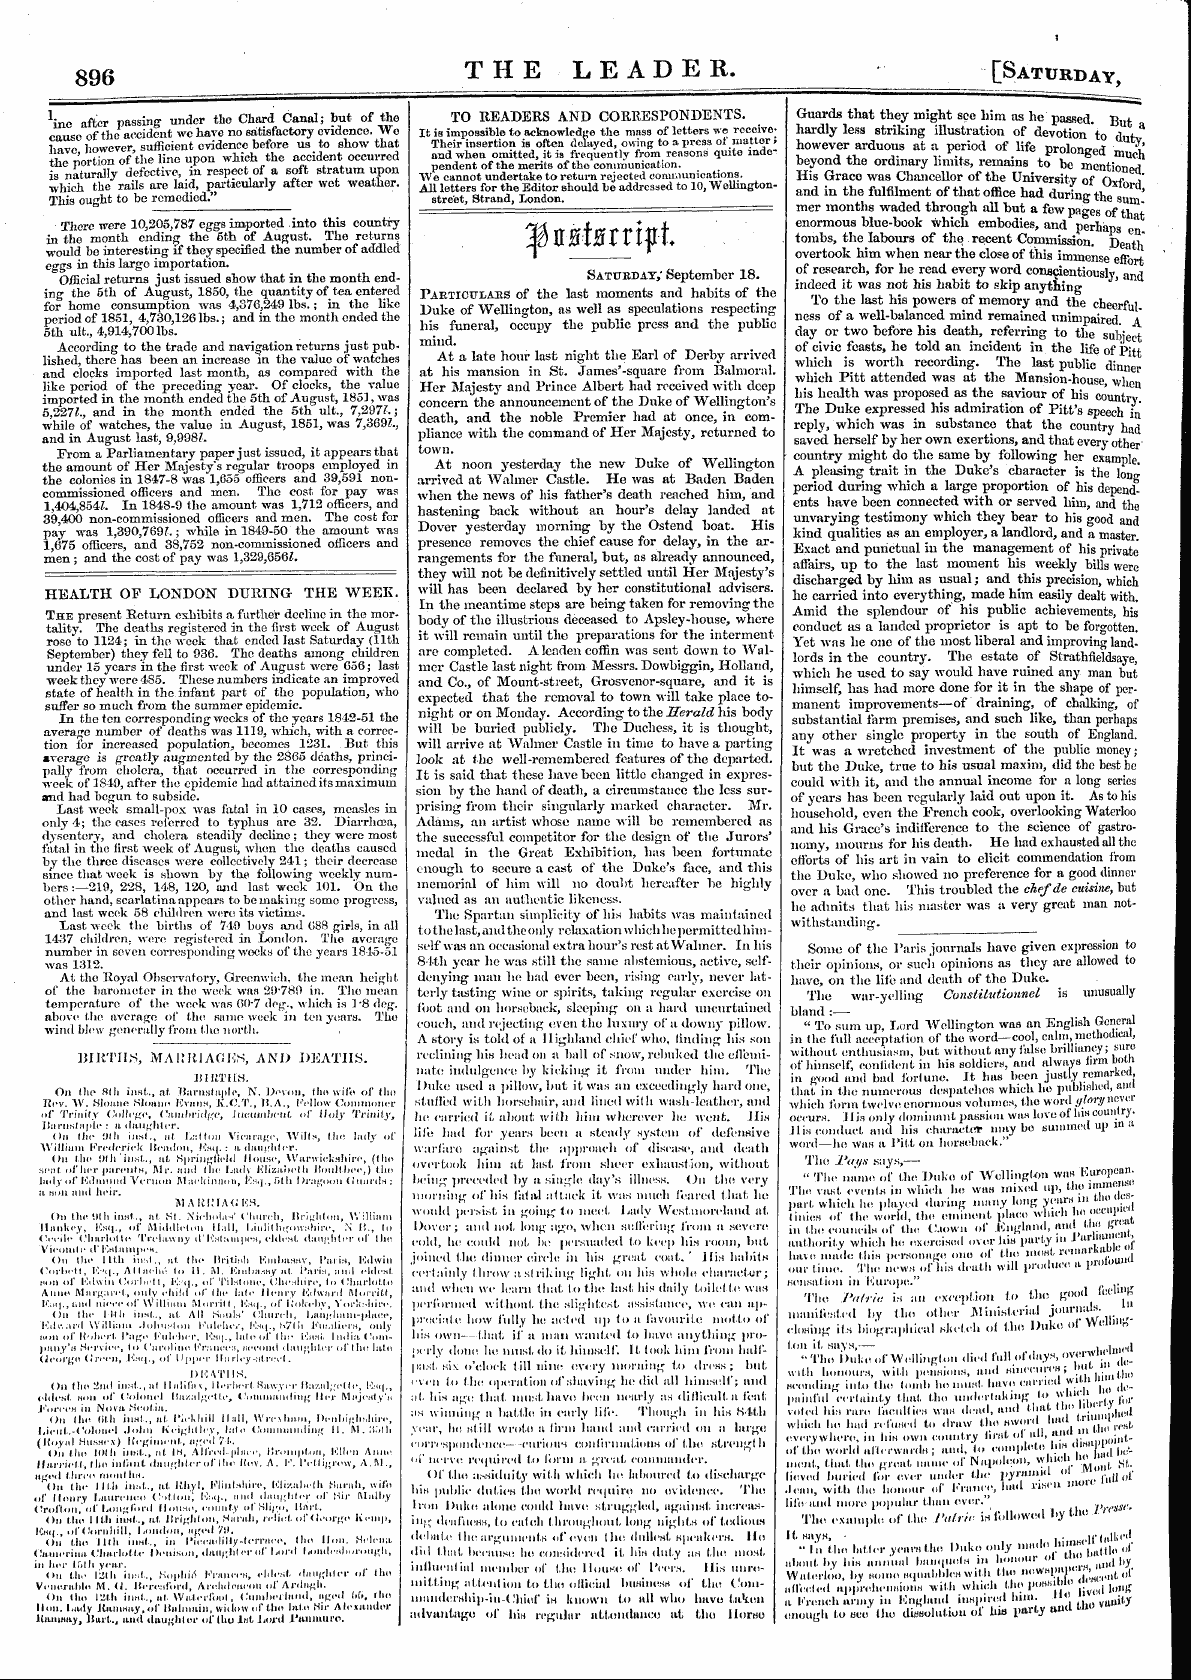 Leader (1850-1860): jS F Y, Town edition - Untitled Article